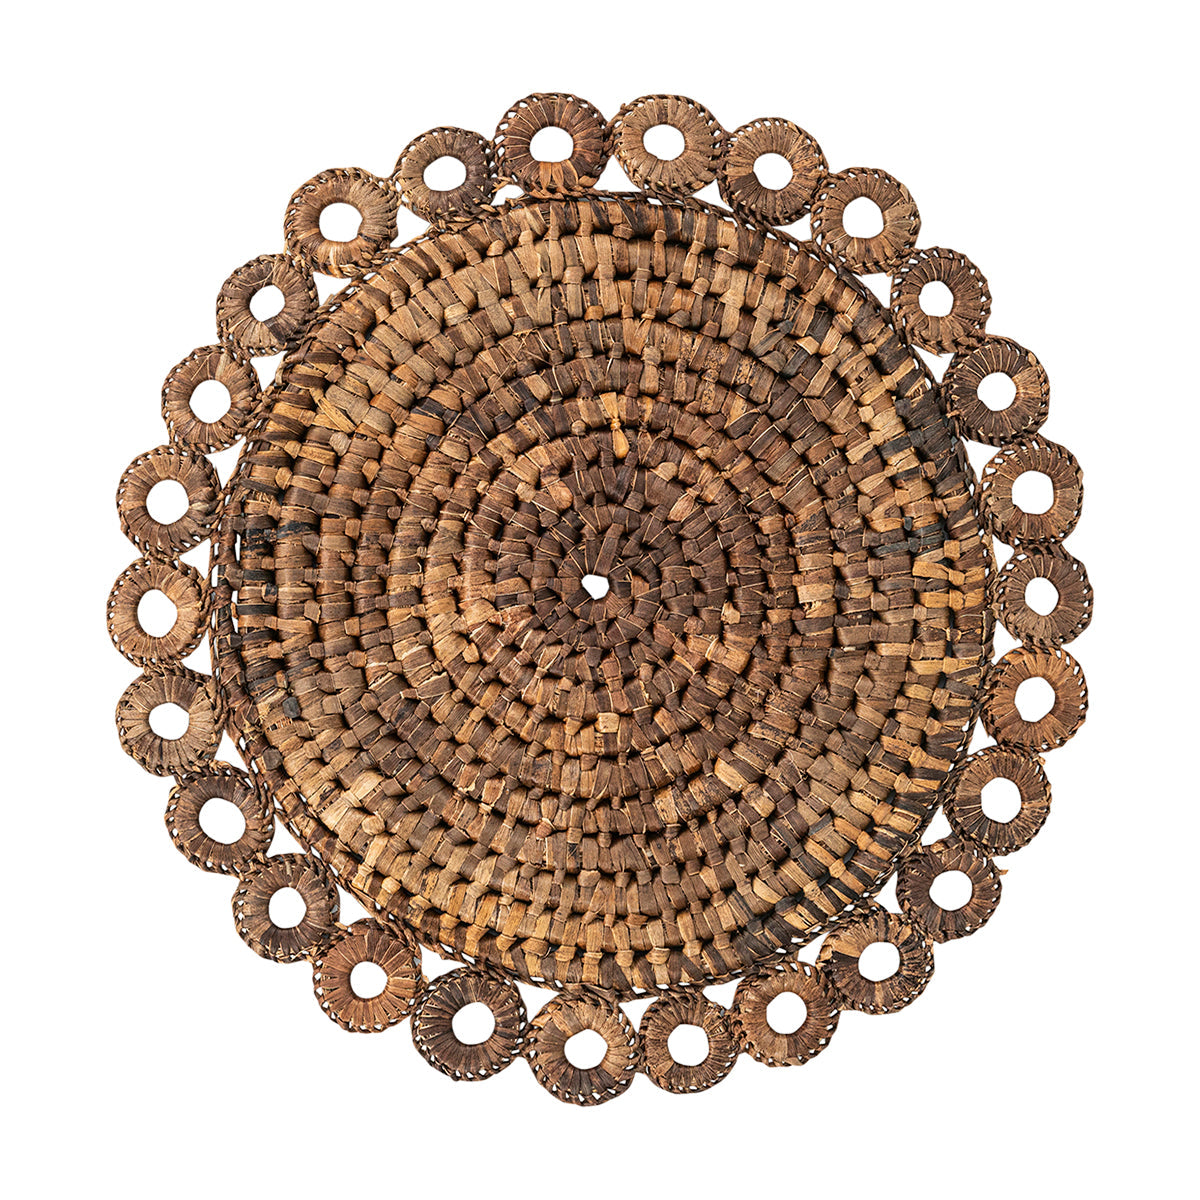 Juliska Rustic Ring Placemat-Home/Giftware-Kevin's Fine Outdoor Gear & Apparel